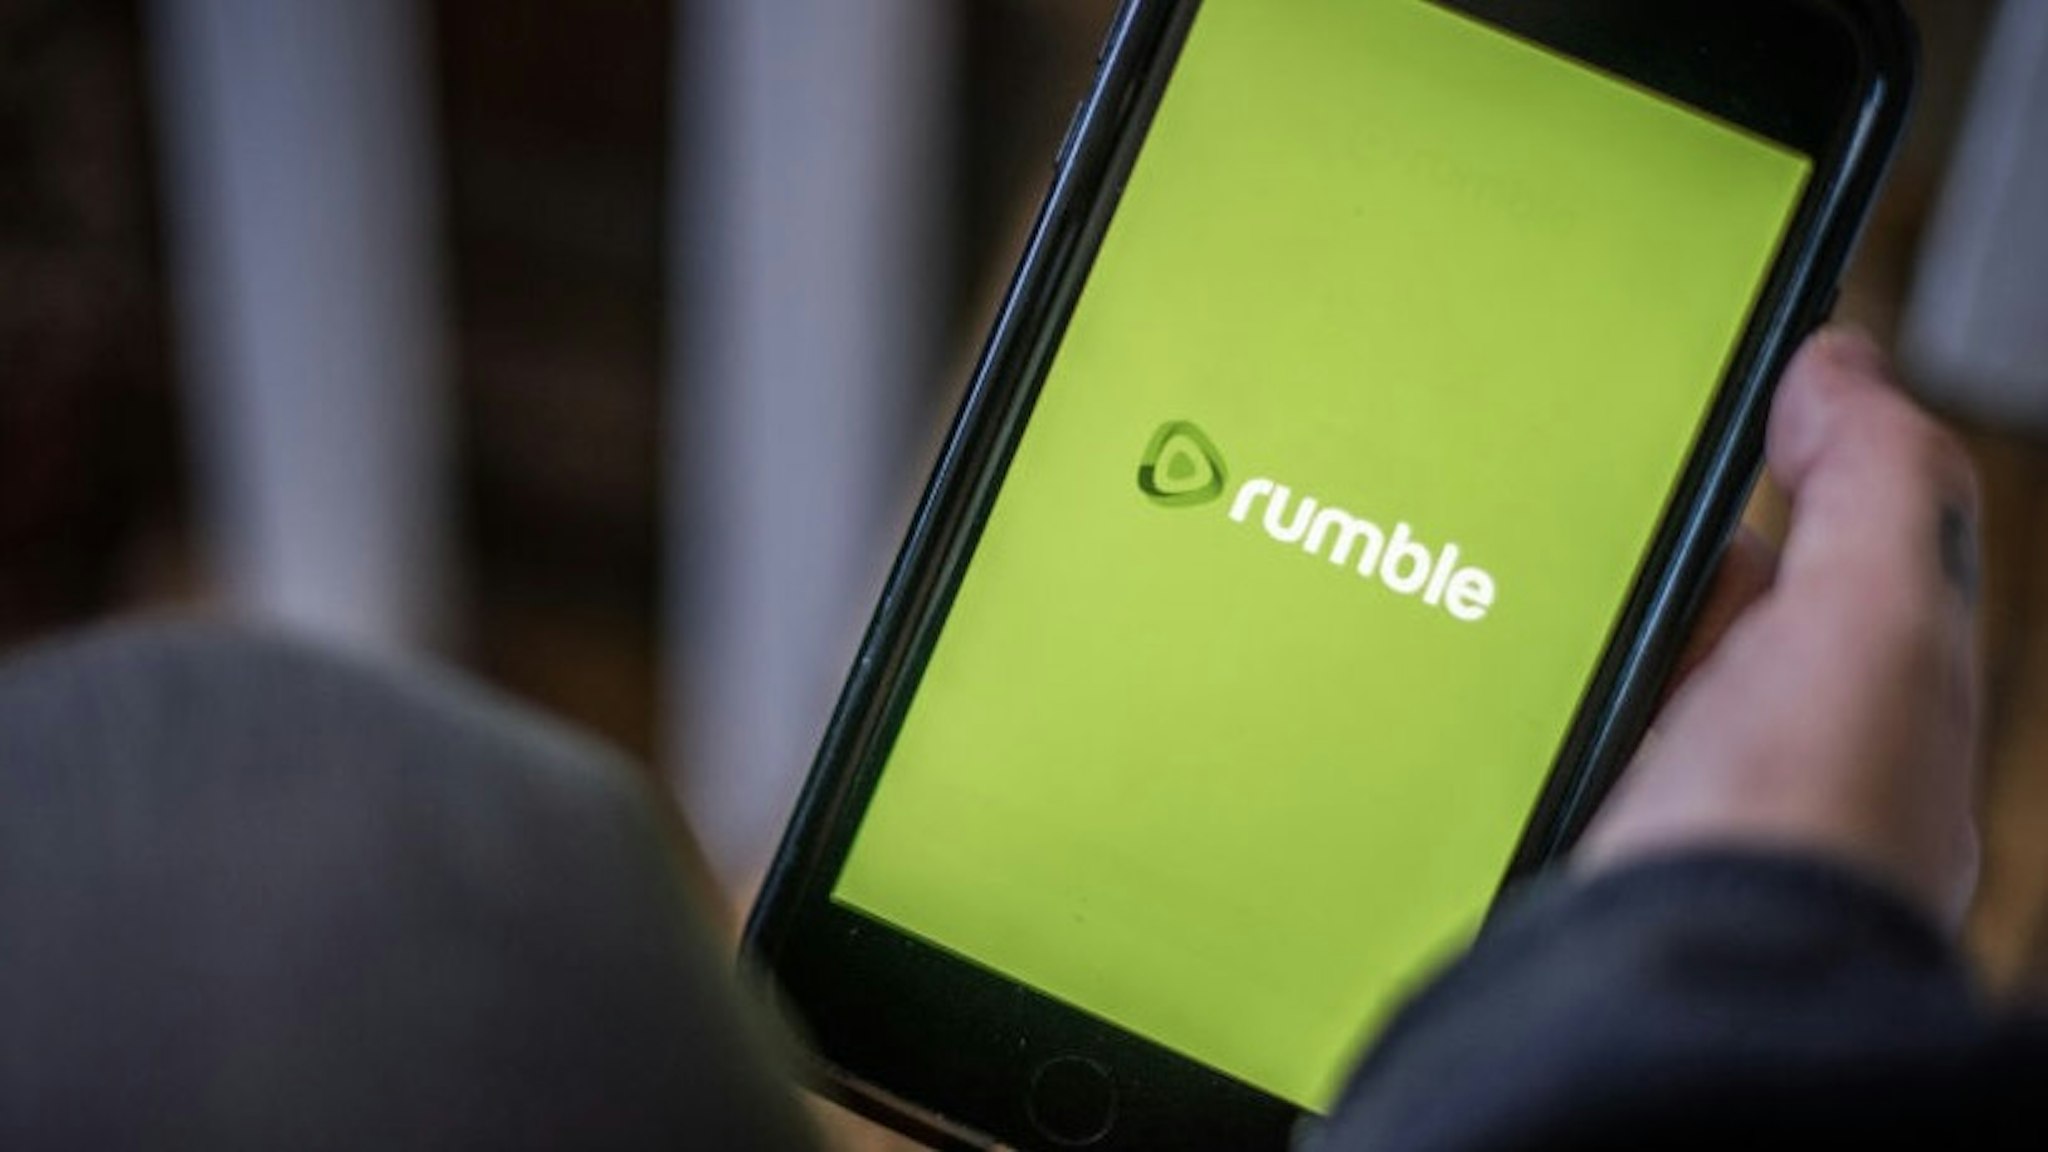 The Rumble video platform logo on a smartphone arranged in Hastings on Hudson, New York, U.S., on Saturday, Jan. 23, 2021. Big tech's decision to ban the Parler app and block former U.S. President Donald Trump is stoking support for alternative social networking sites and apps that bill themselves as promoting free speech and privacy. Photographer: Tiffany Hagler-Geard/Bloomberg via Getty Images